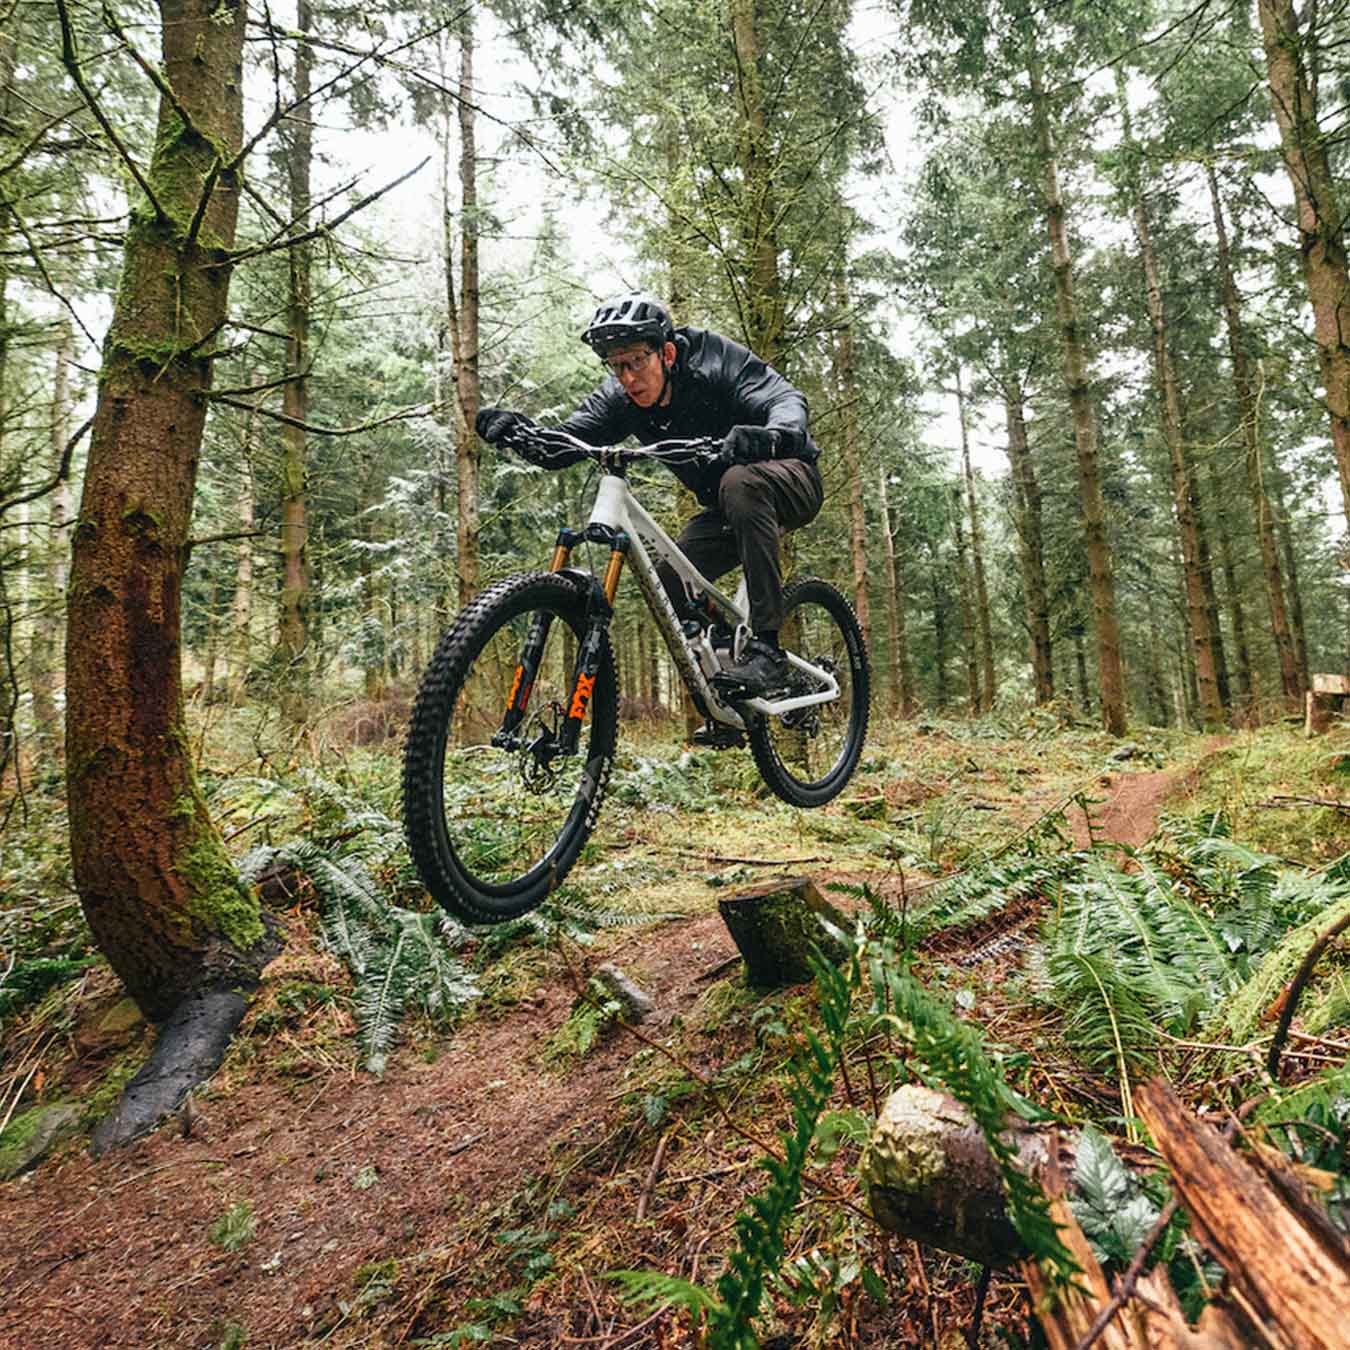 Managing tech editor Mike Kazimer takes the Commencal Tempo out for a test ride in Bellingham.